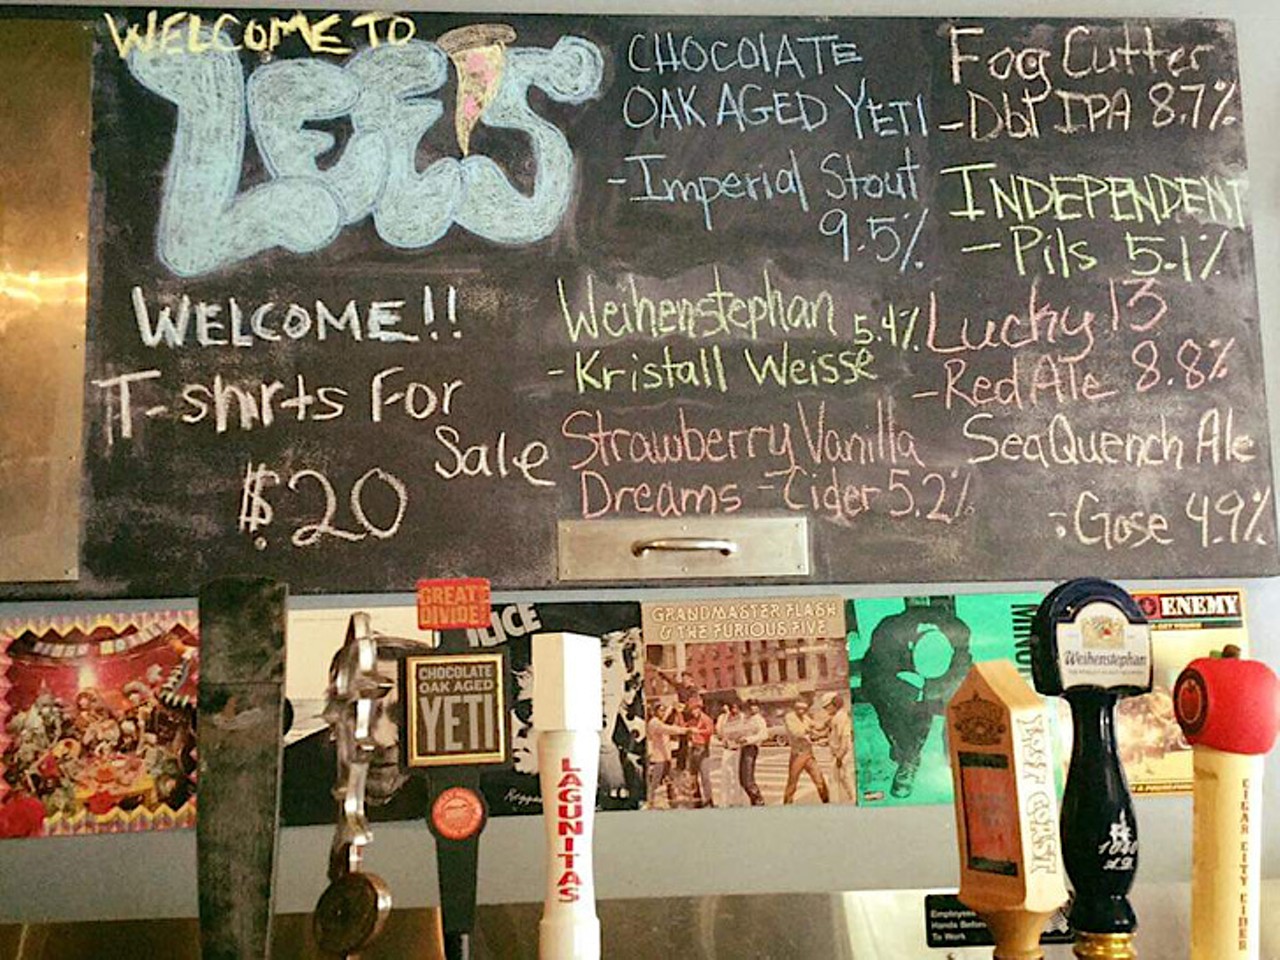 Lee&#146;s Grocery
2210 N. Central Ave, Tampa, FL
Pizza and craft brews are what Lee&#146;s specializes in. The bar doubles as a grocery (in case you couldn&#146;t tell by the name), so you can even take a case of craft beer home with you. 
Photo via Lee&#146;s Grocery/Facebook